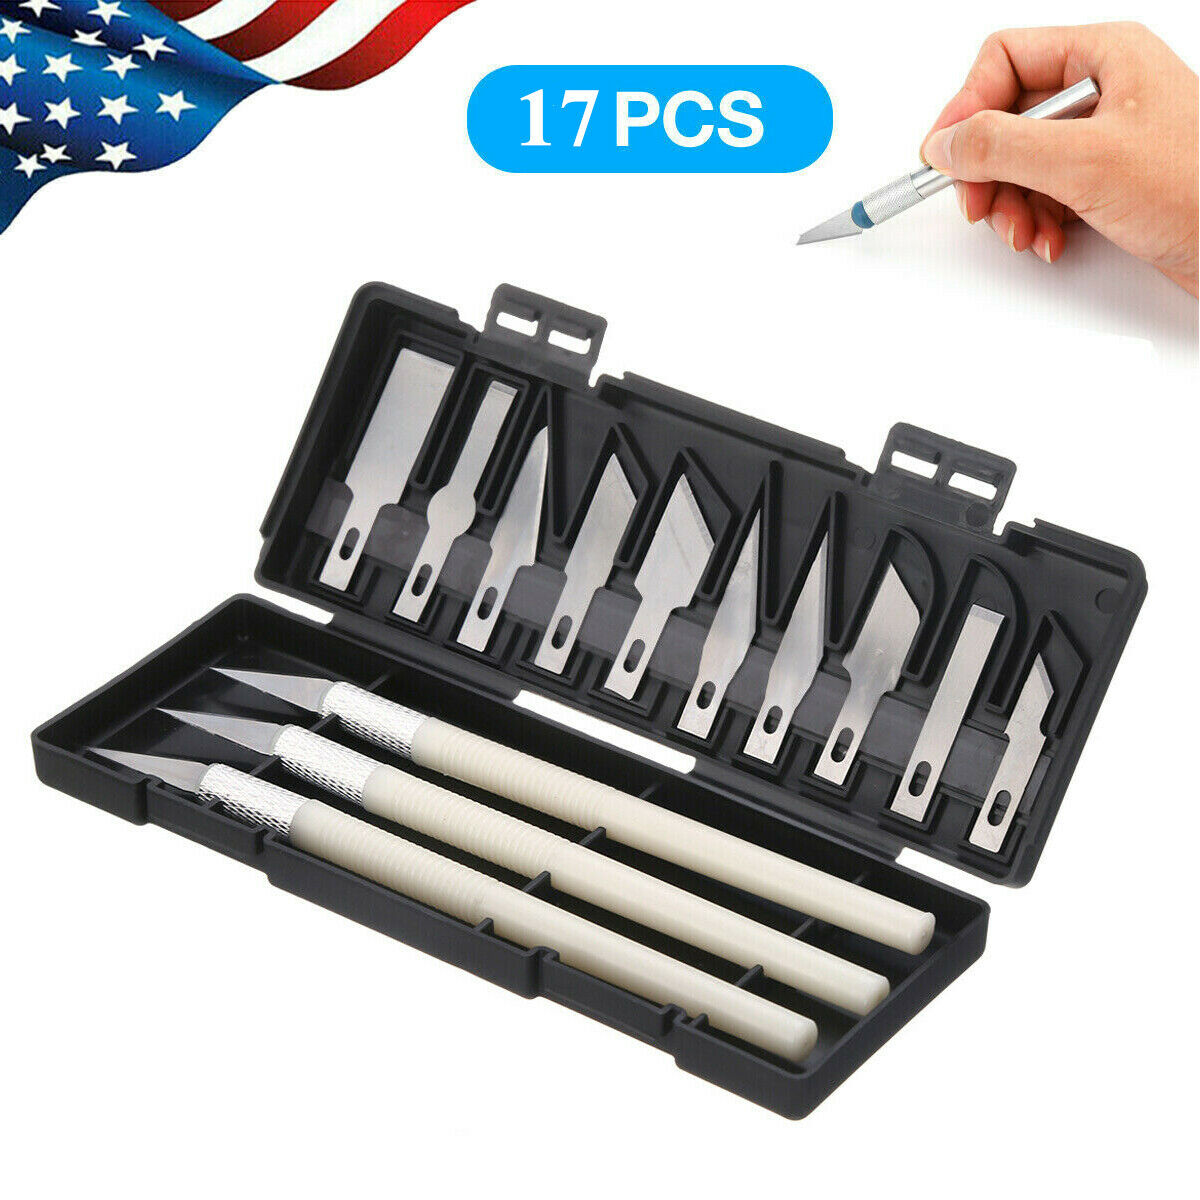 17 Piece Knife Set Exacto Style Razor For Model Making Crafts Mat Cutting